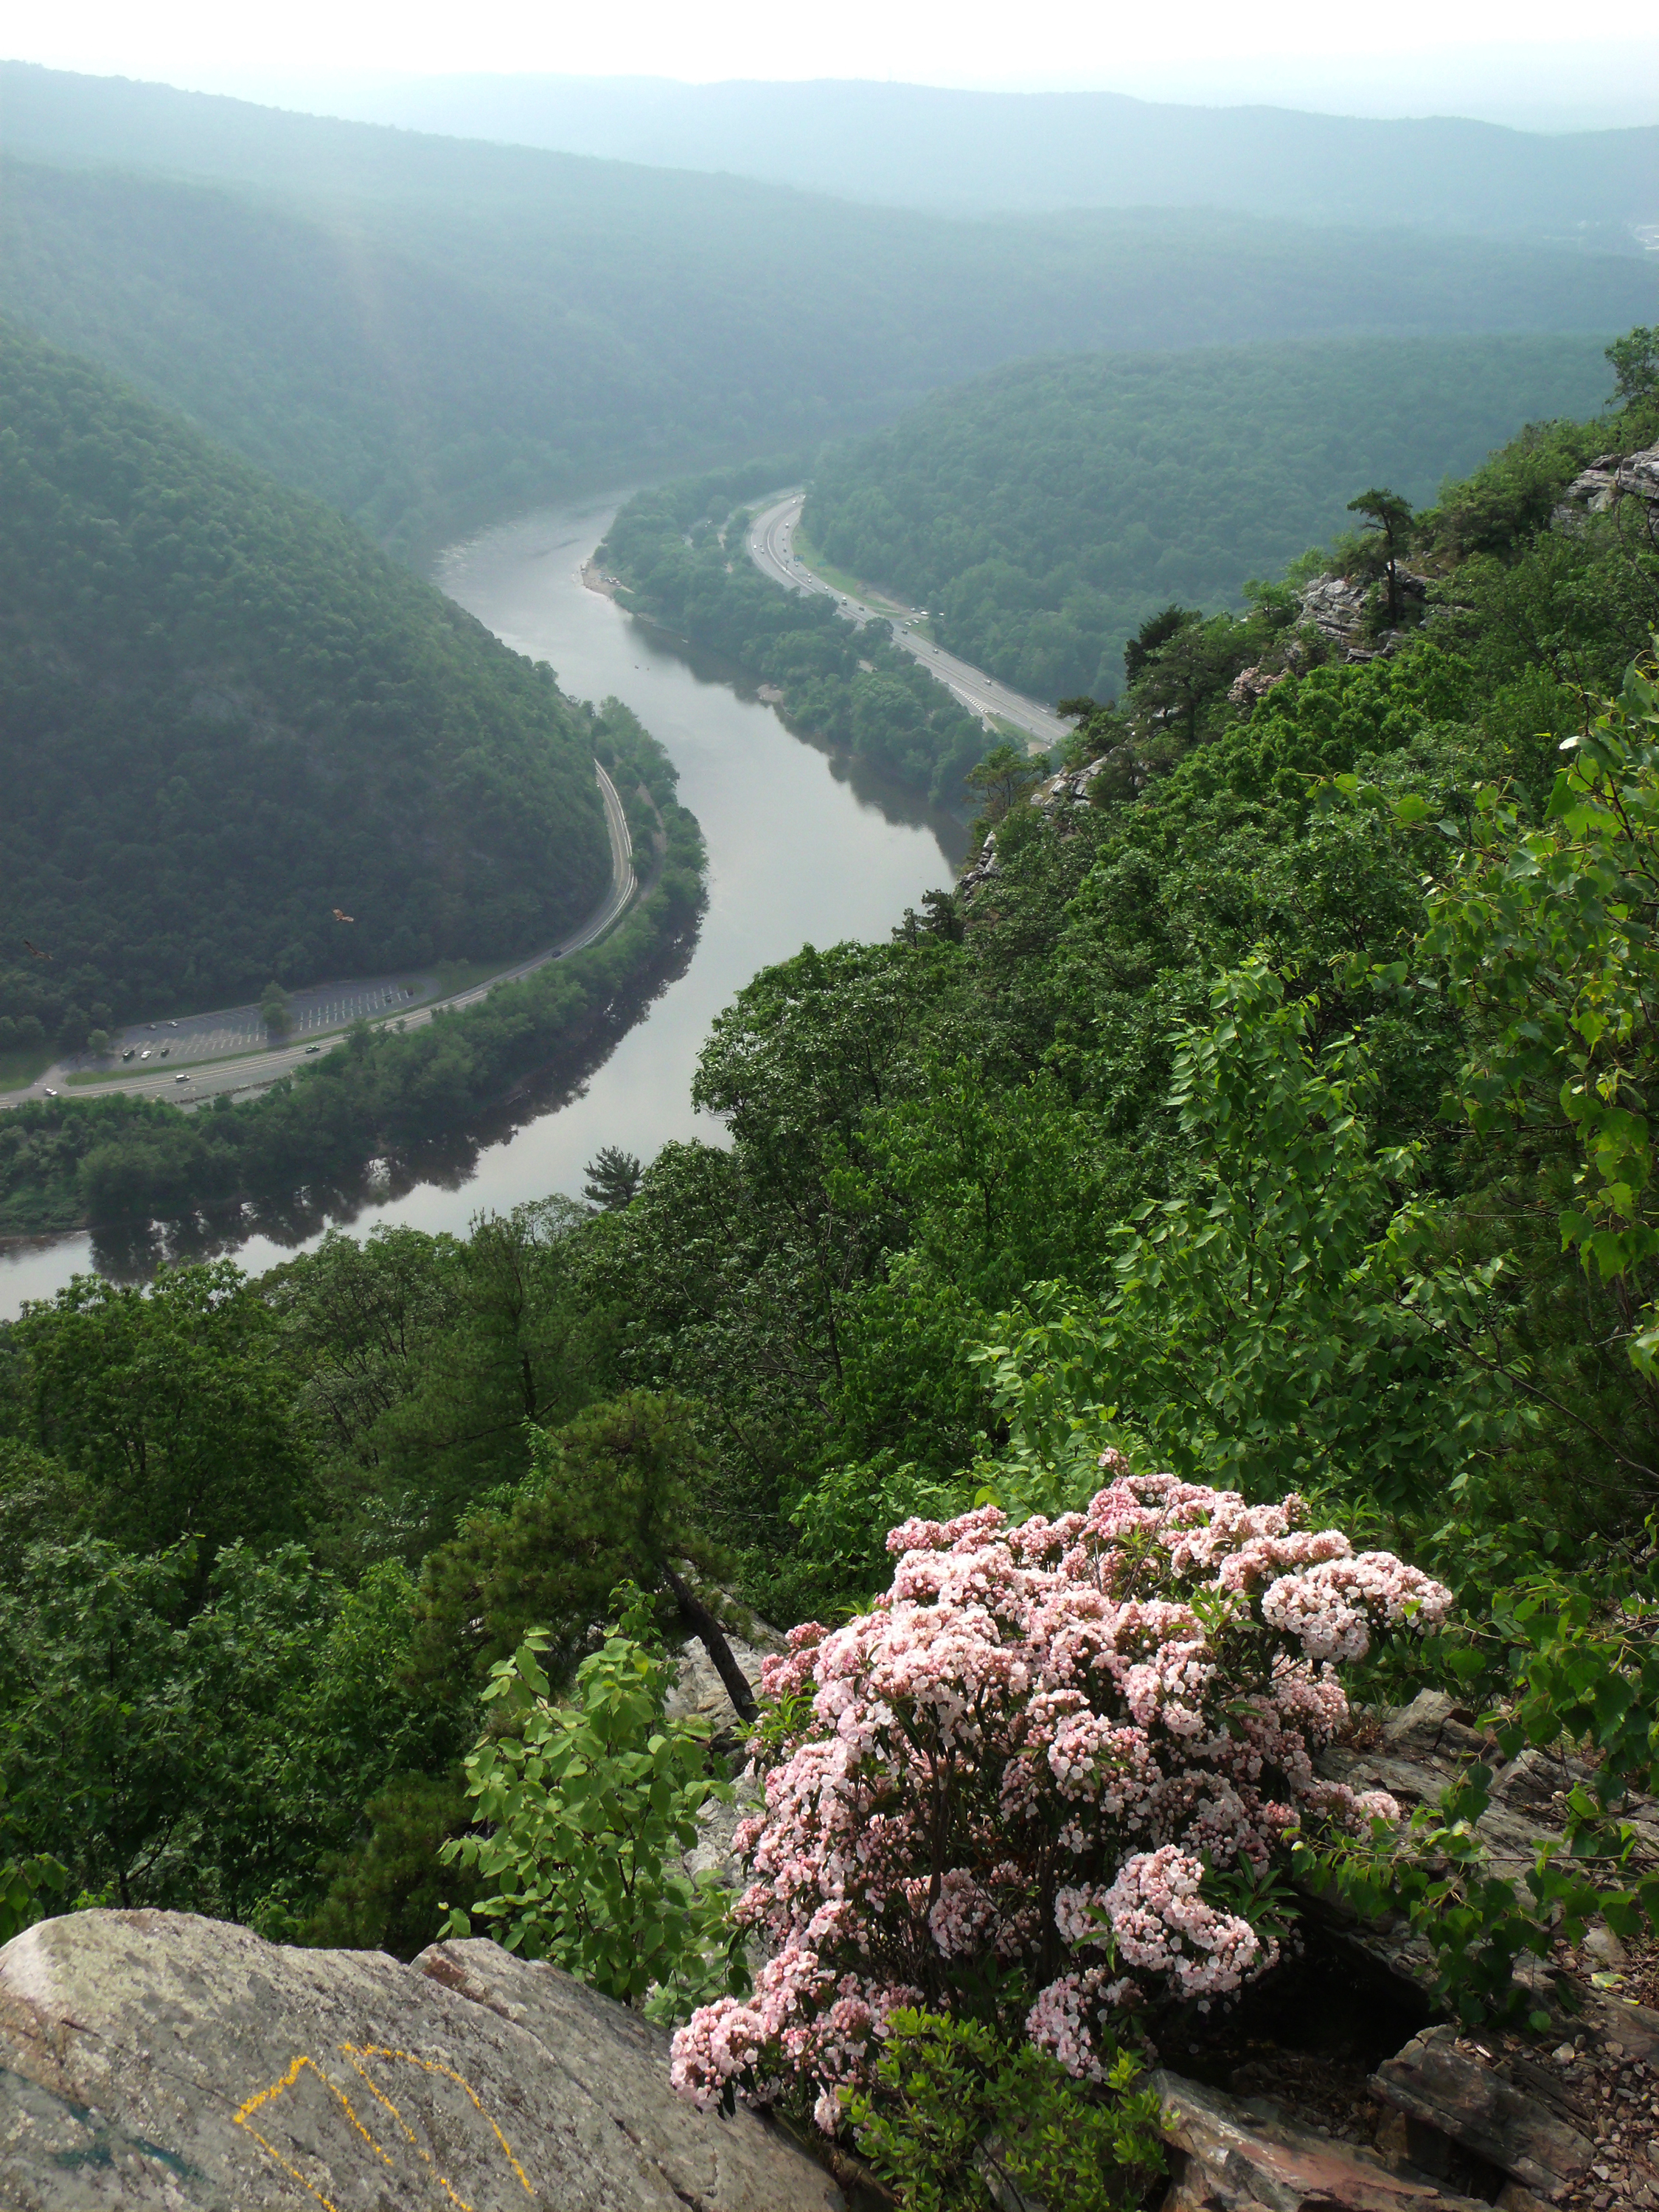 a snaking river view from a mountain top